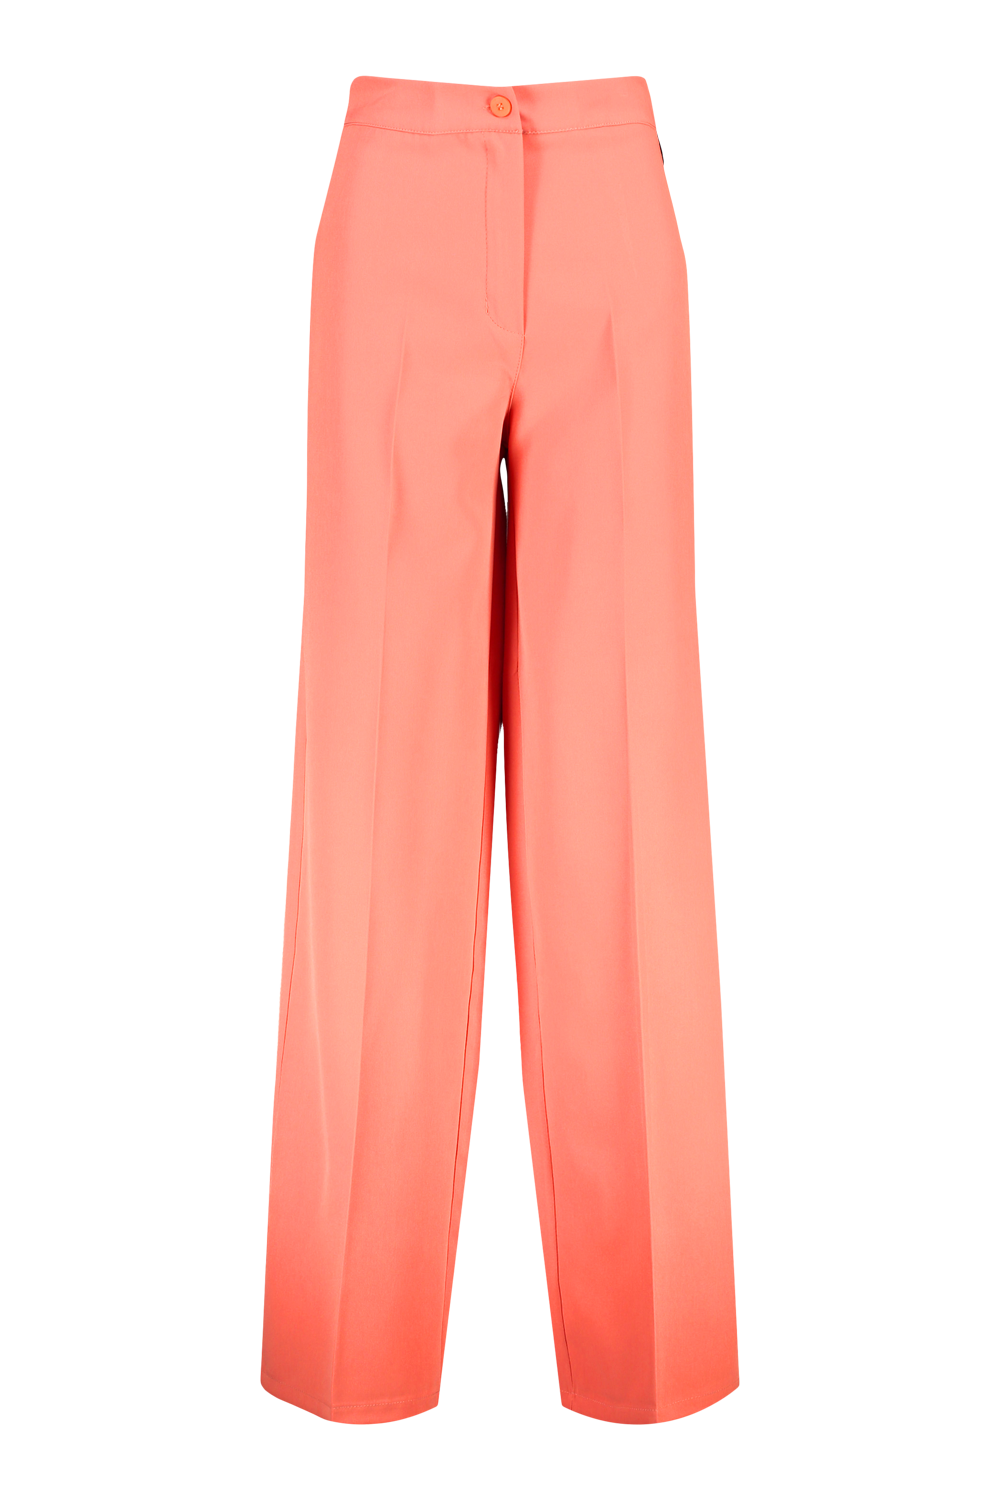 Trousers: Buy Trousers Starts Rs:199 Online at Best Prices in